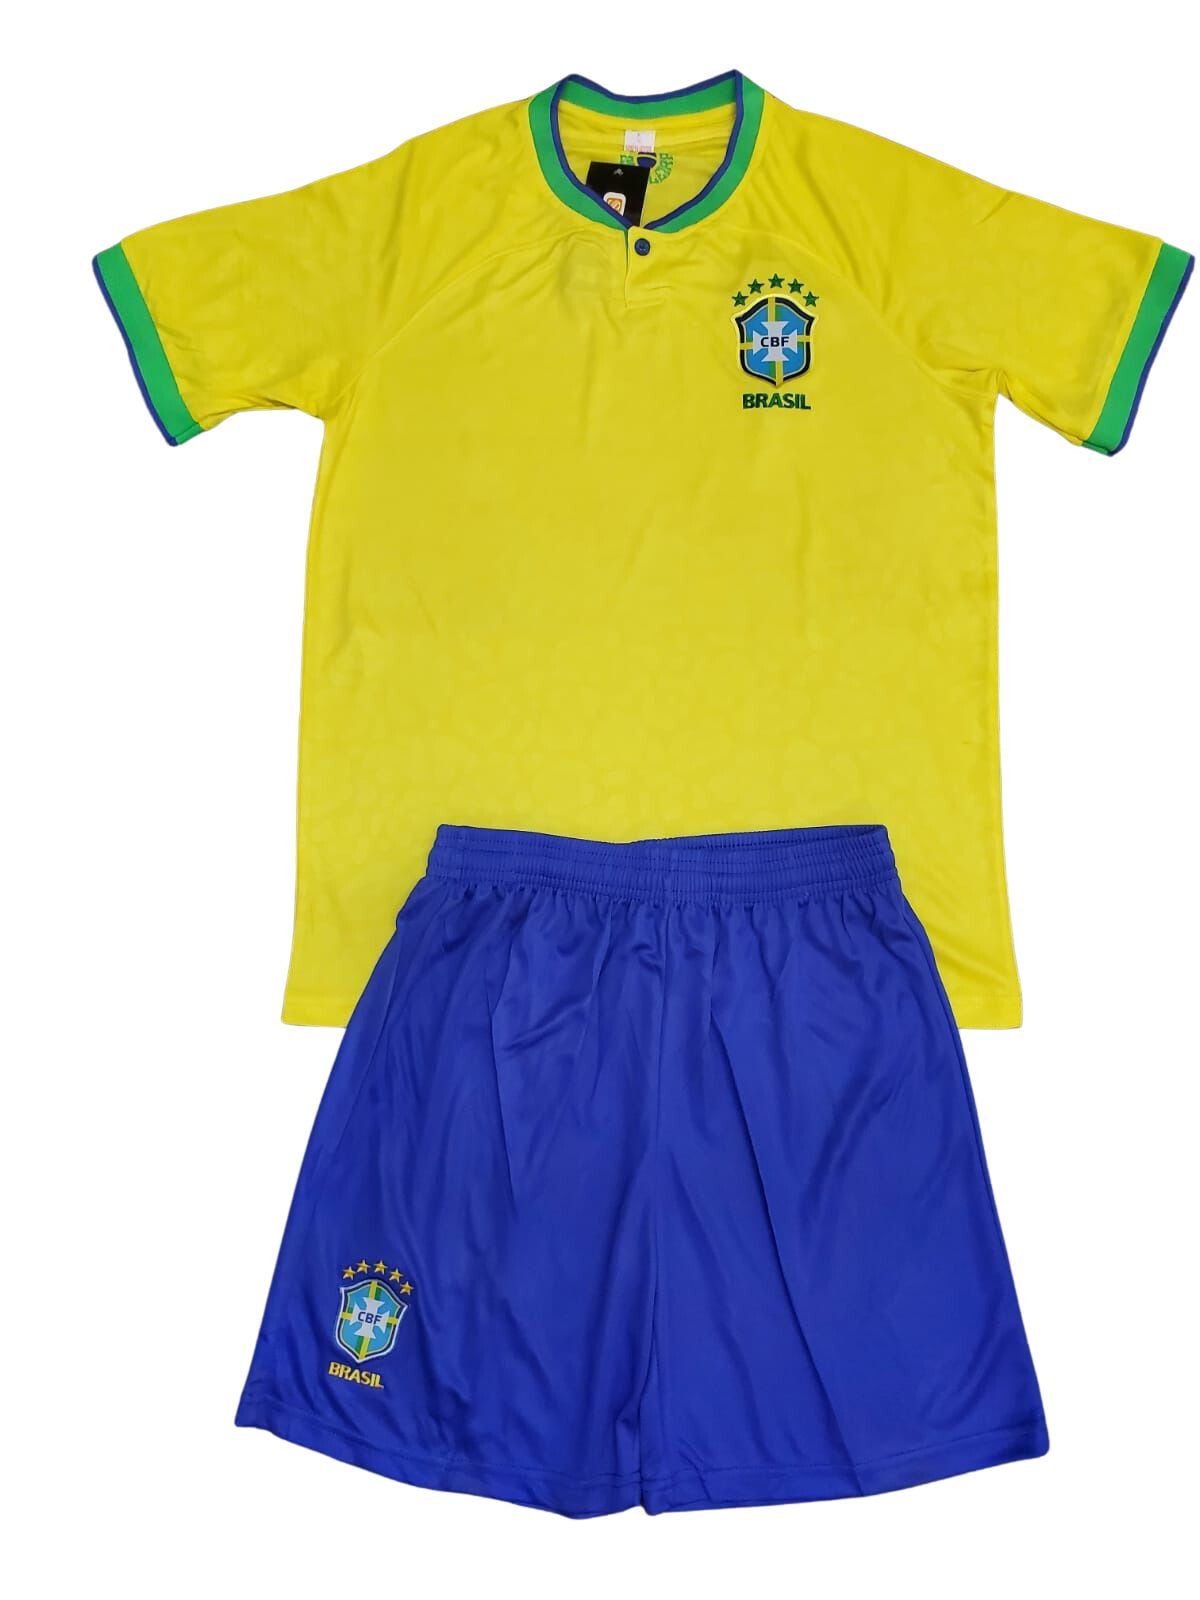 G&S Brazil Home Soccer Kid Set- Jersey and Short- Youth Small (8 Year old)